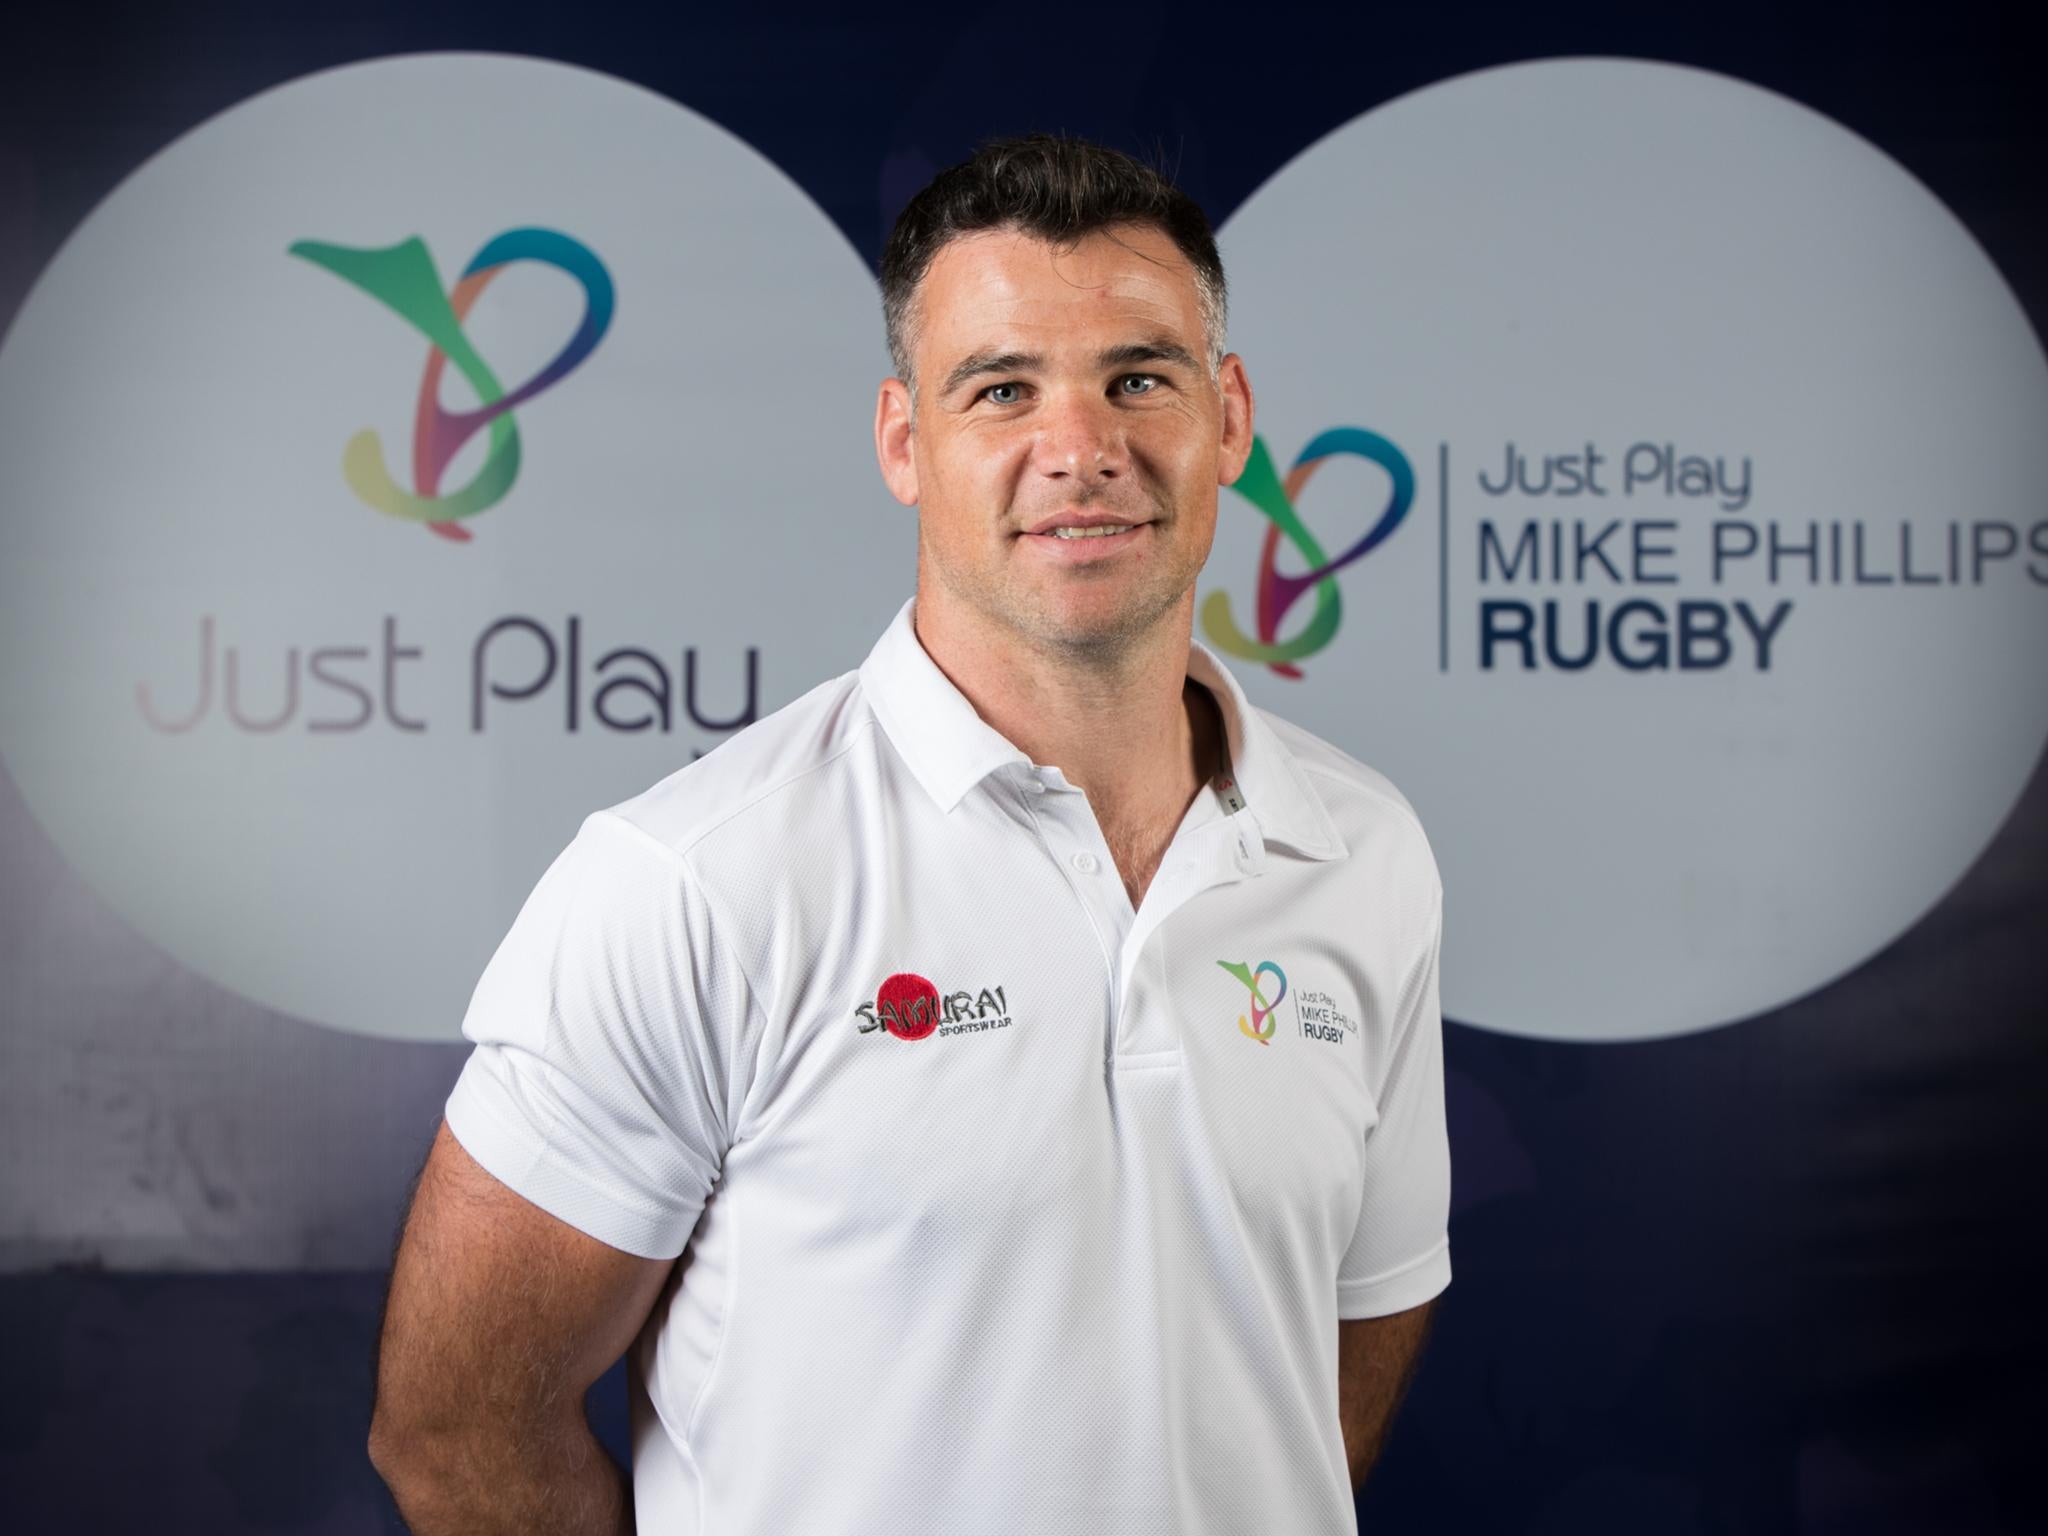 Mike Phillips has launched his coaching career in Dubai after ending his rugby career